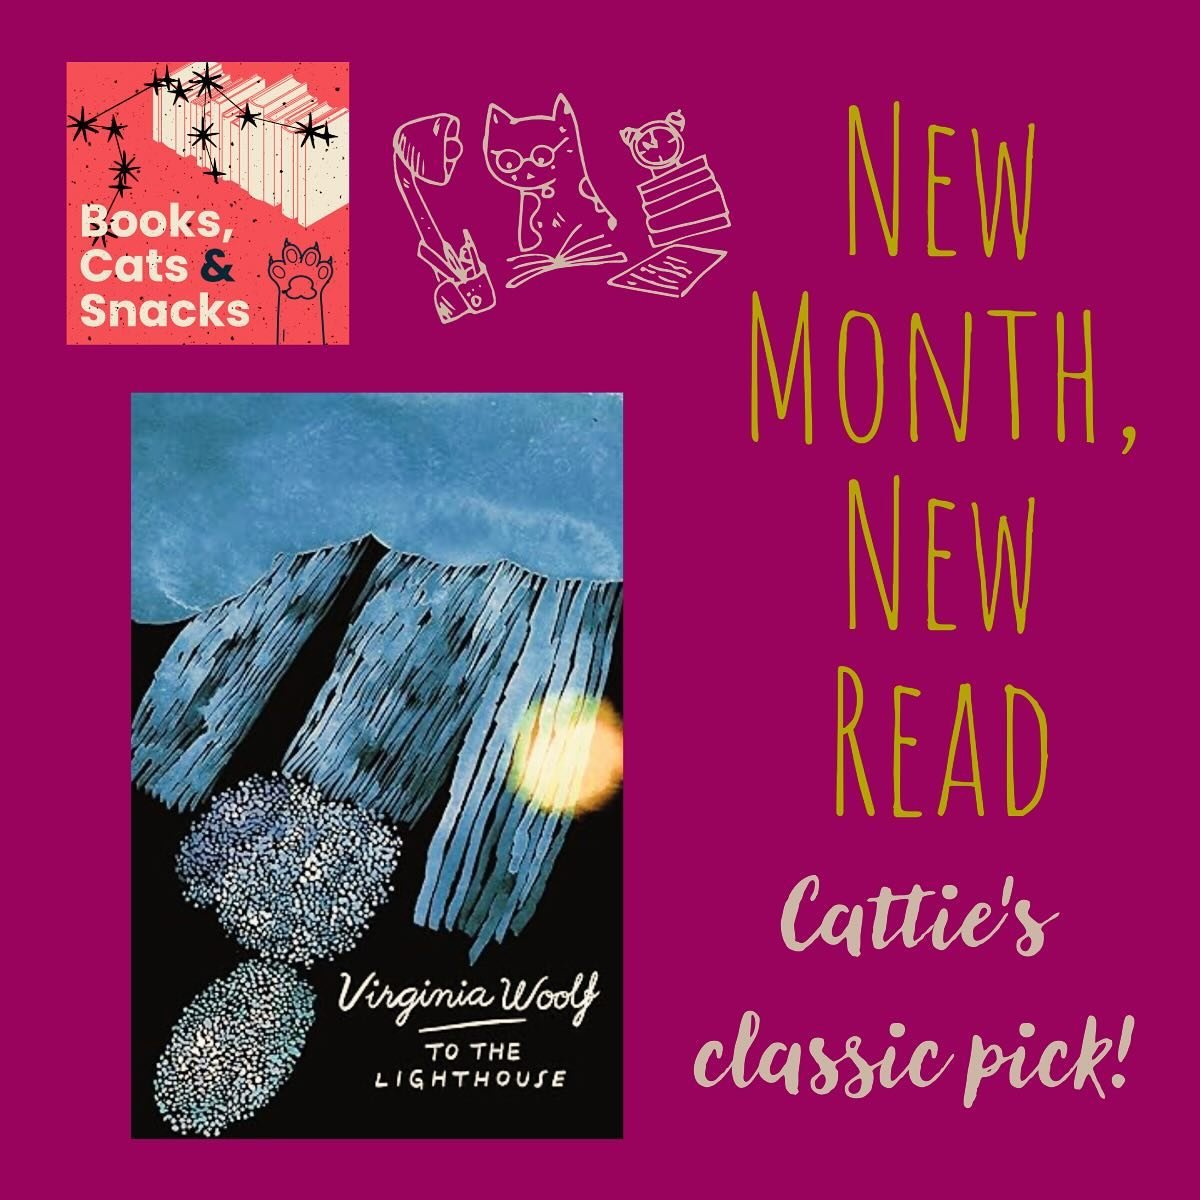 It&rsquo;s classic month and Cattie has picked a great one! We&rsquo;re still discussing April&rsquo;s book for this Saturday&rsquo;s episode, but here&rsquo;s the pick for May: To the Lighthouse by Virginia Woolf. @cattie_naj @oakylovesbooksandtacos